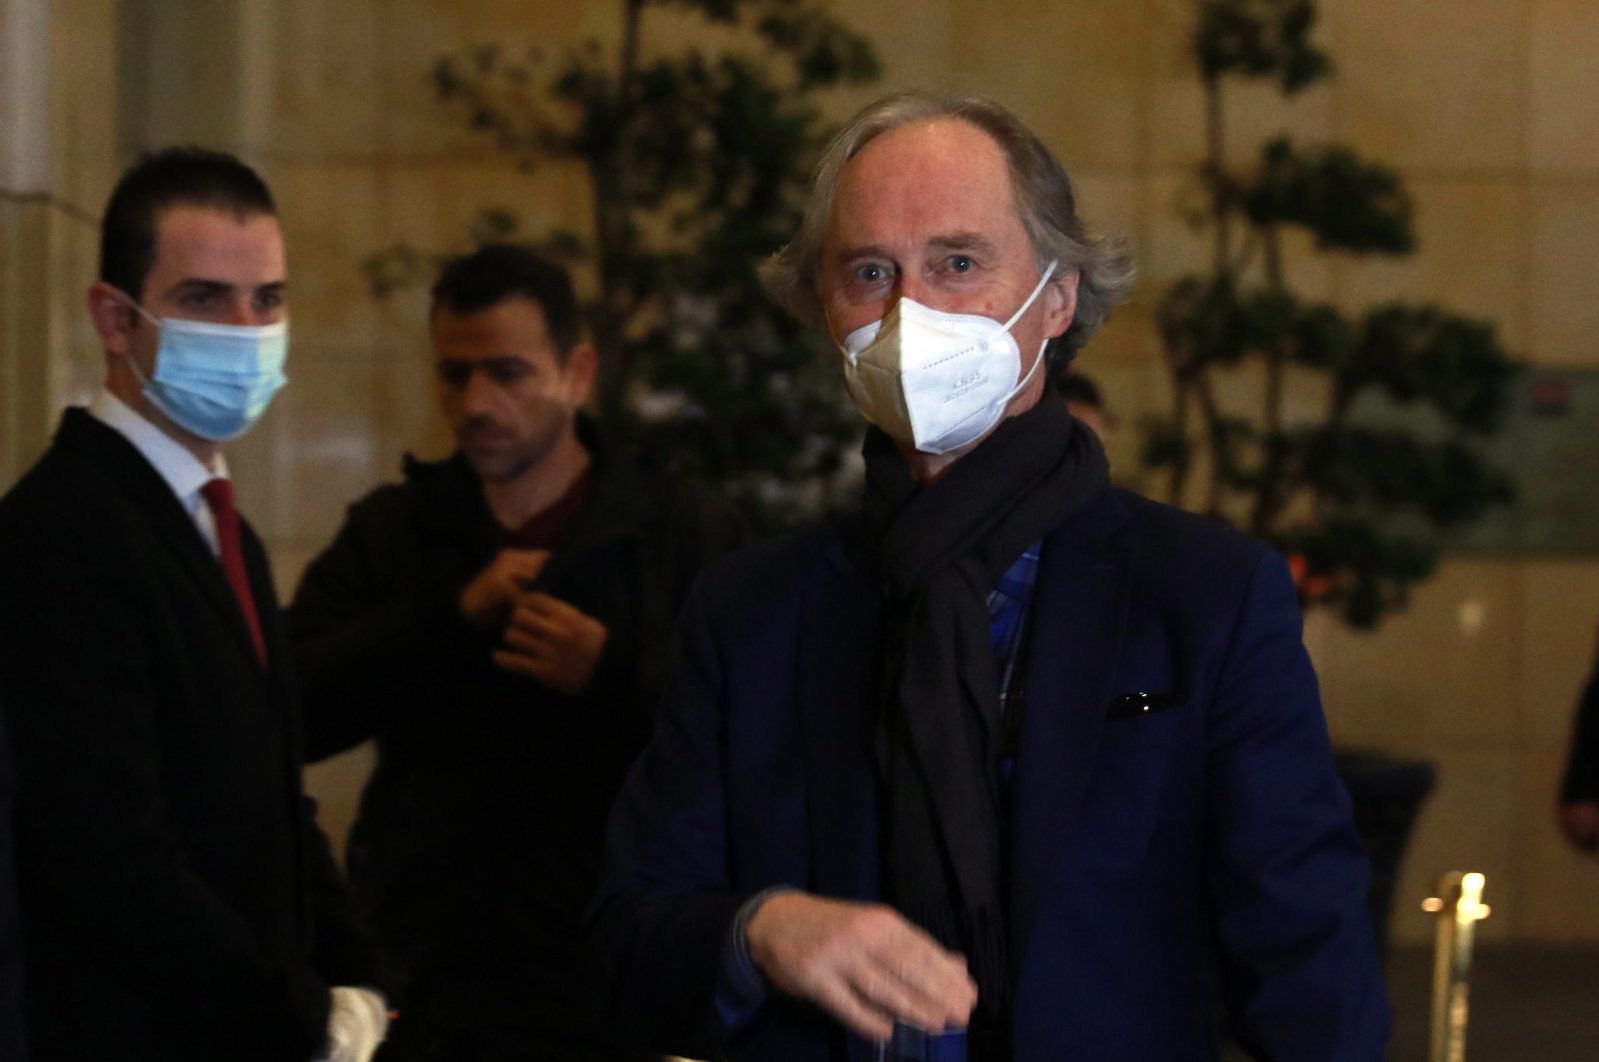 U.N. special envoy to Syria Geir Pederson arrives at his residence at the Four Season hotel in Damascus, Syria, Dec. 2021. (EPA Photo)